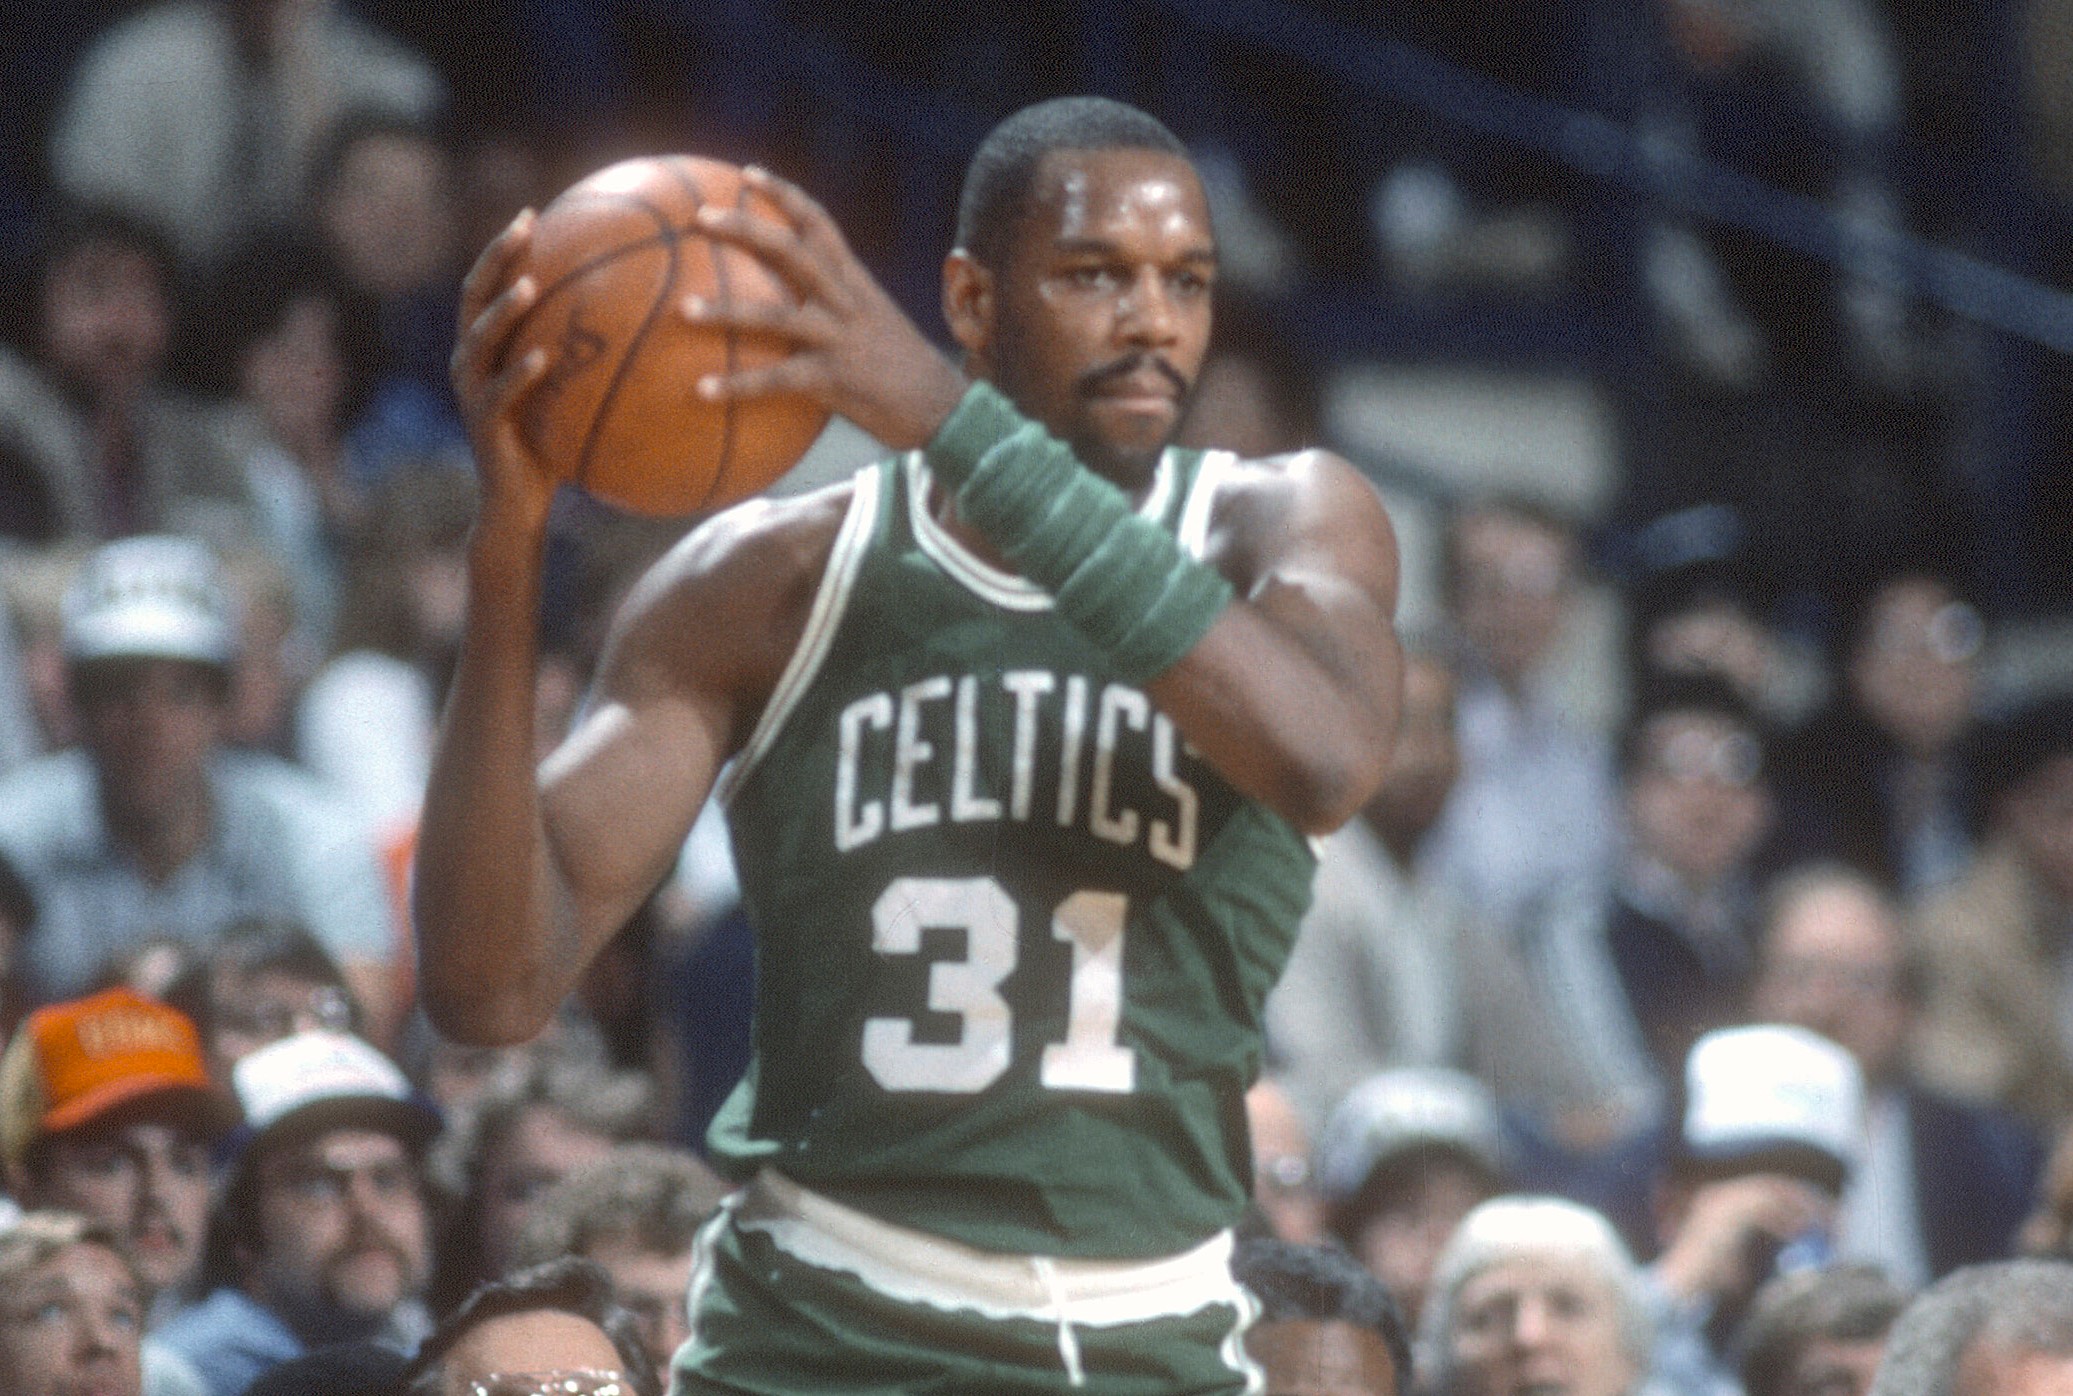 Cedric Maxwell, the Most Underrated Boston Celtics Player in the 1980s, Came Up Big When It Counted Most